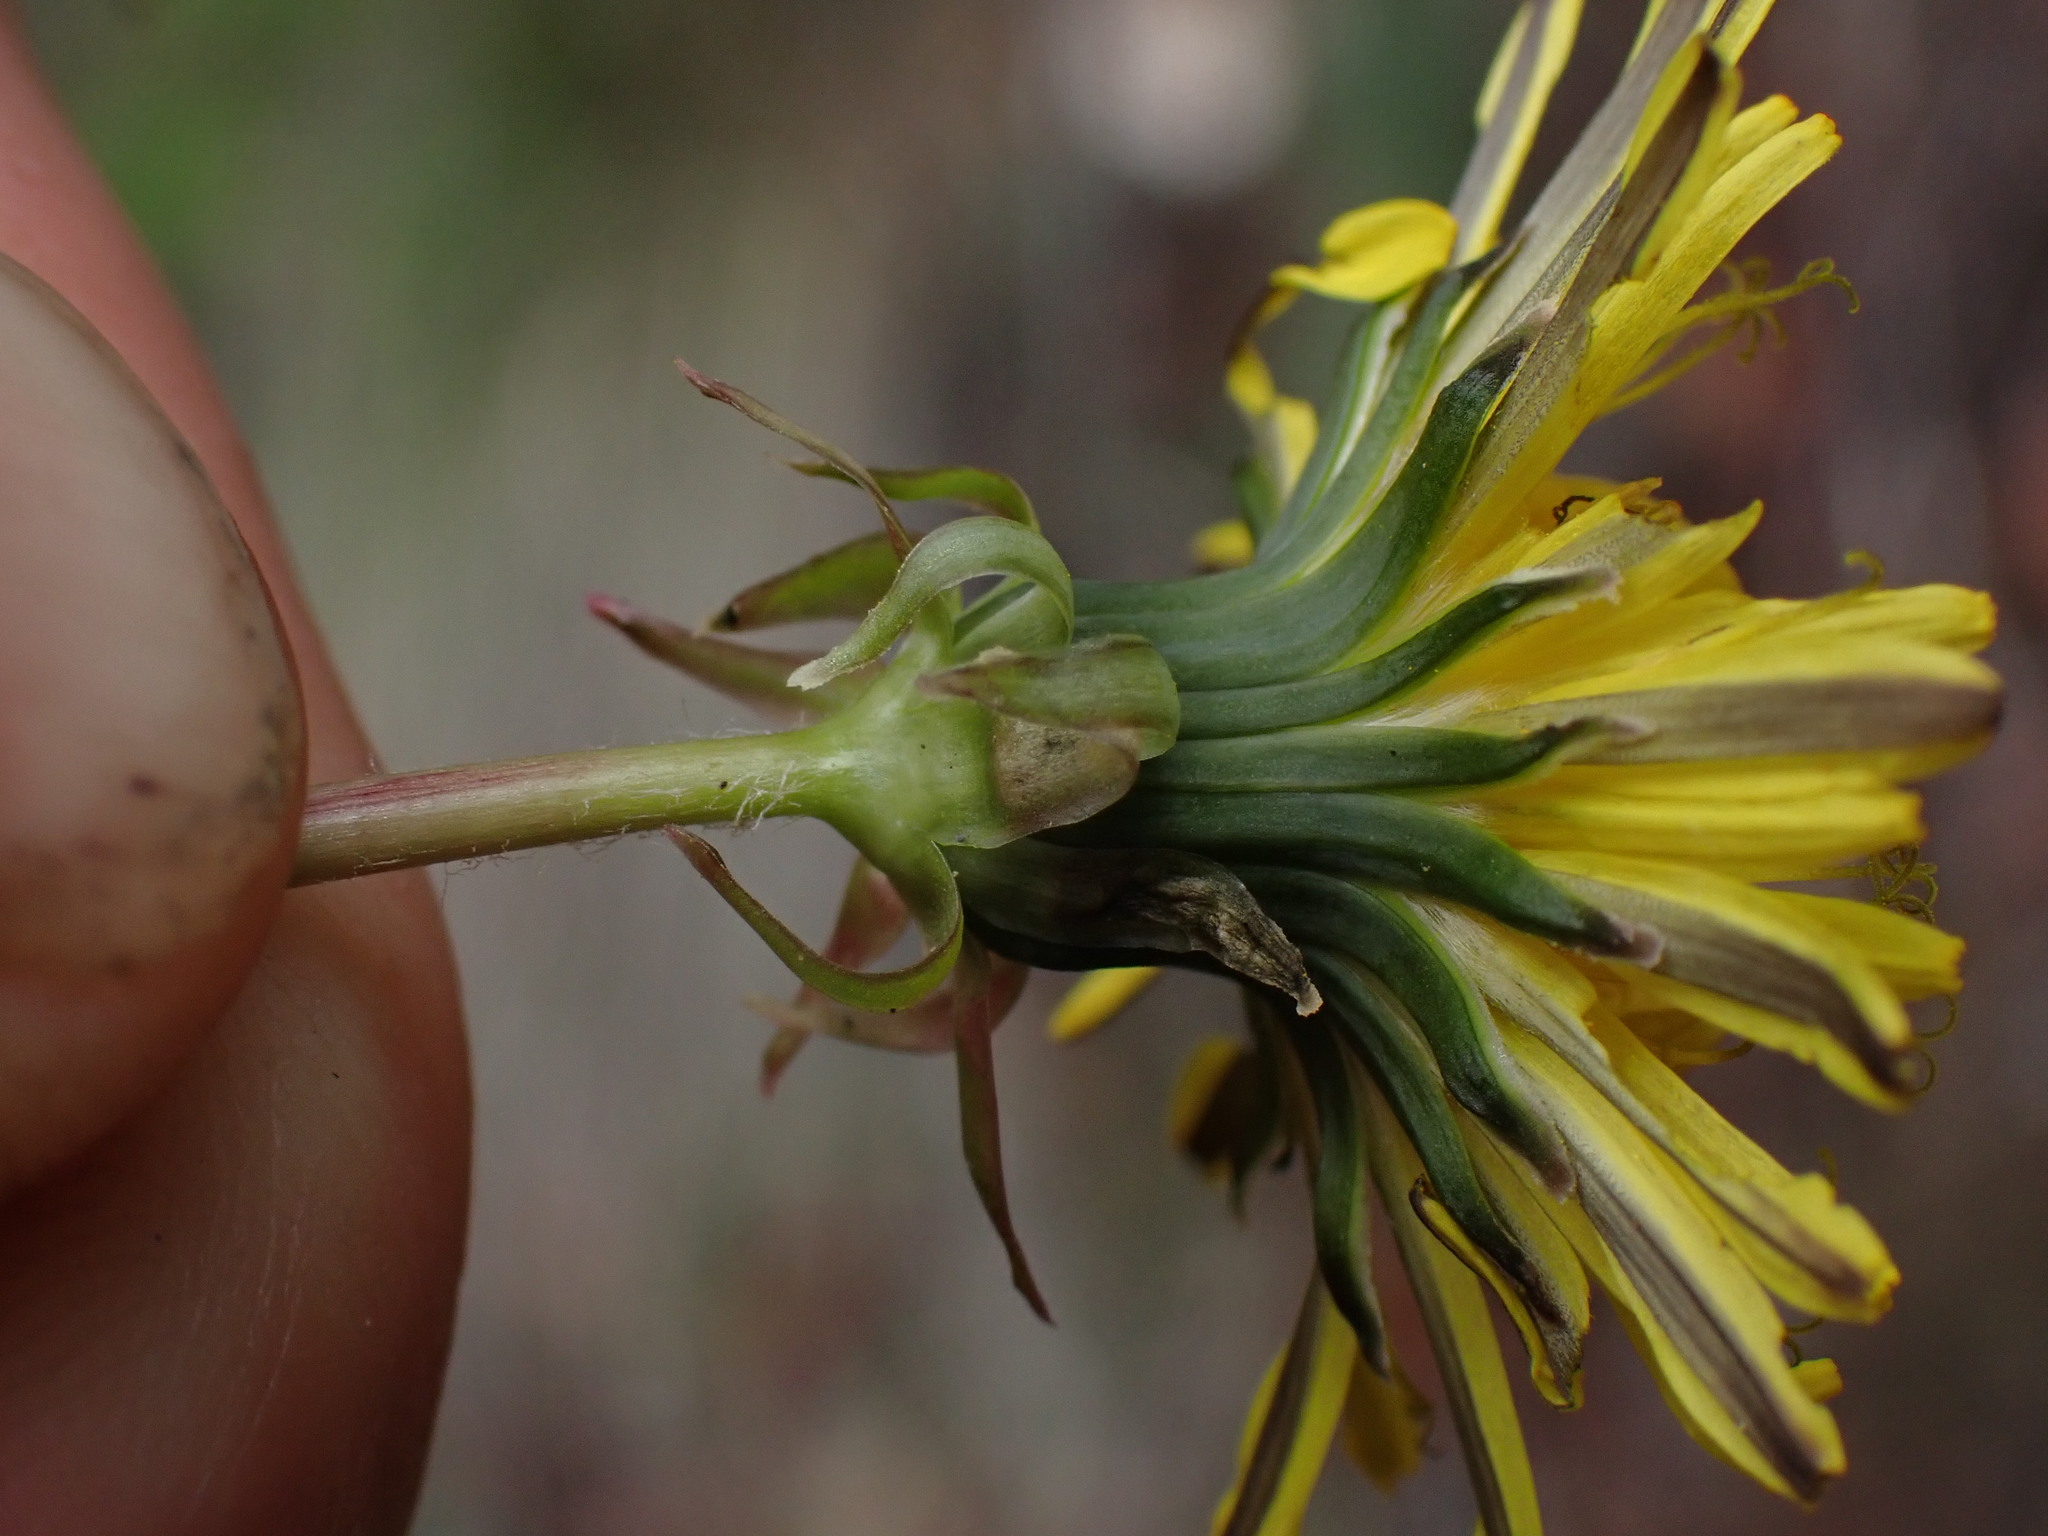 Involucral bracts of a common dandelion